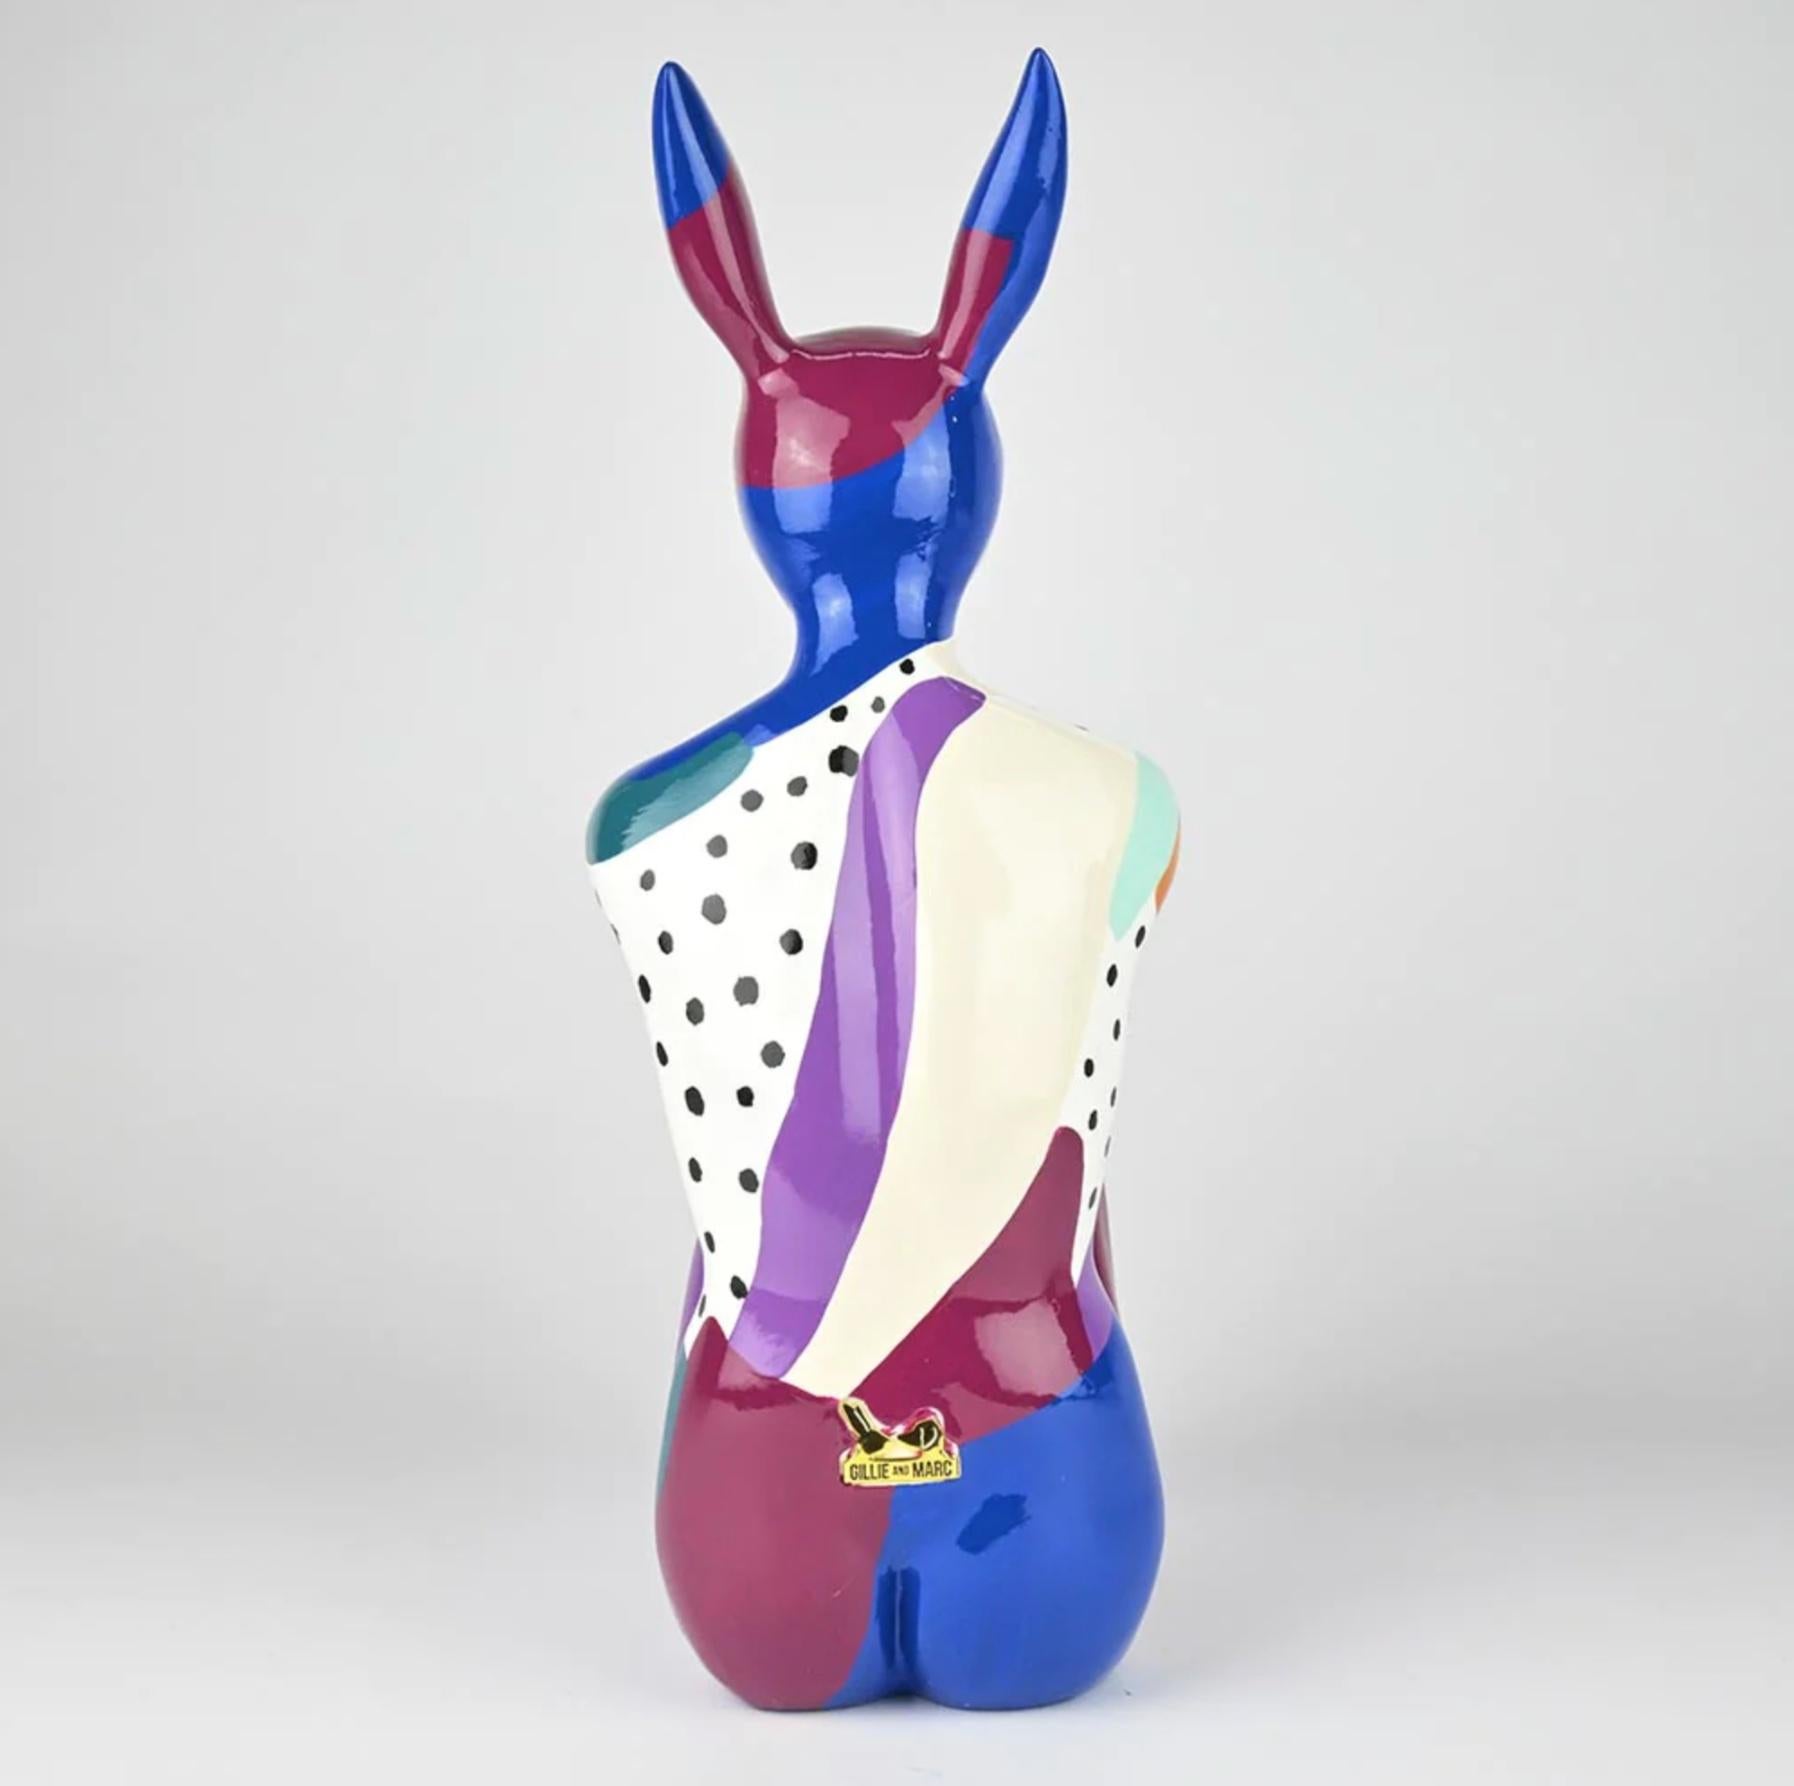 Title: Splash Pop City Bunny (Rainy Forest Days)
Authentic Resin Sculpture

This authentic bronze sculpture titled 'Splash Pop City Bunny' in Rainy Forest Days by artists Gillie and Marc has been meticulously crafted in resin. This sculpture